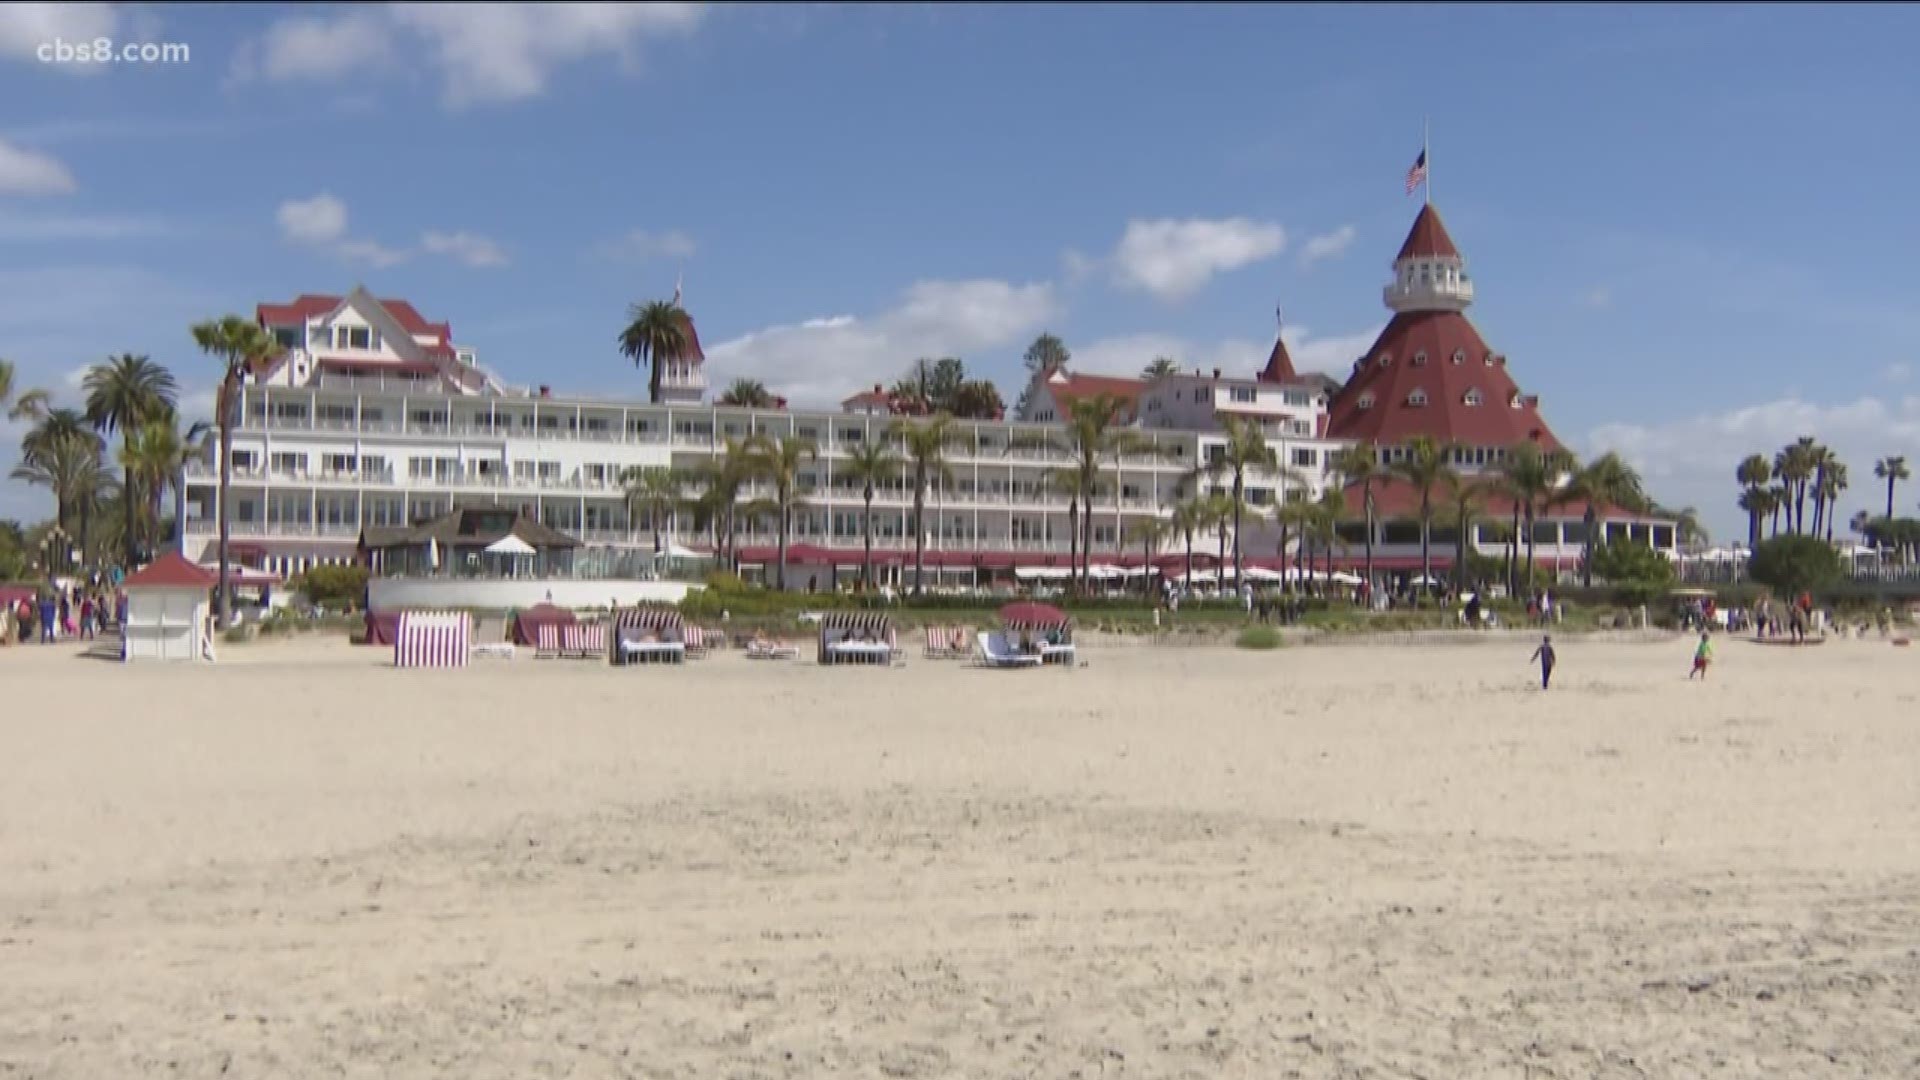 News 8 looks into the history of Coronado, and what it's like today. We revisit Hotel del, the ferry landing, Coronado Shore Towers and other places featured in 1987